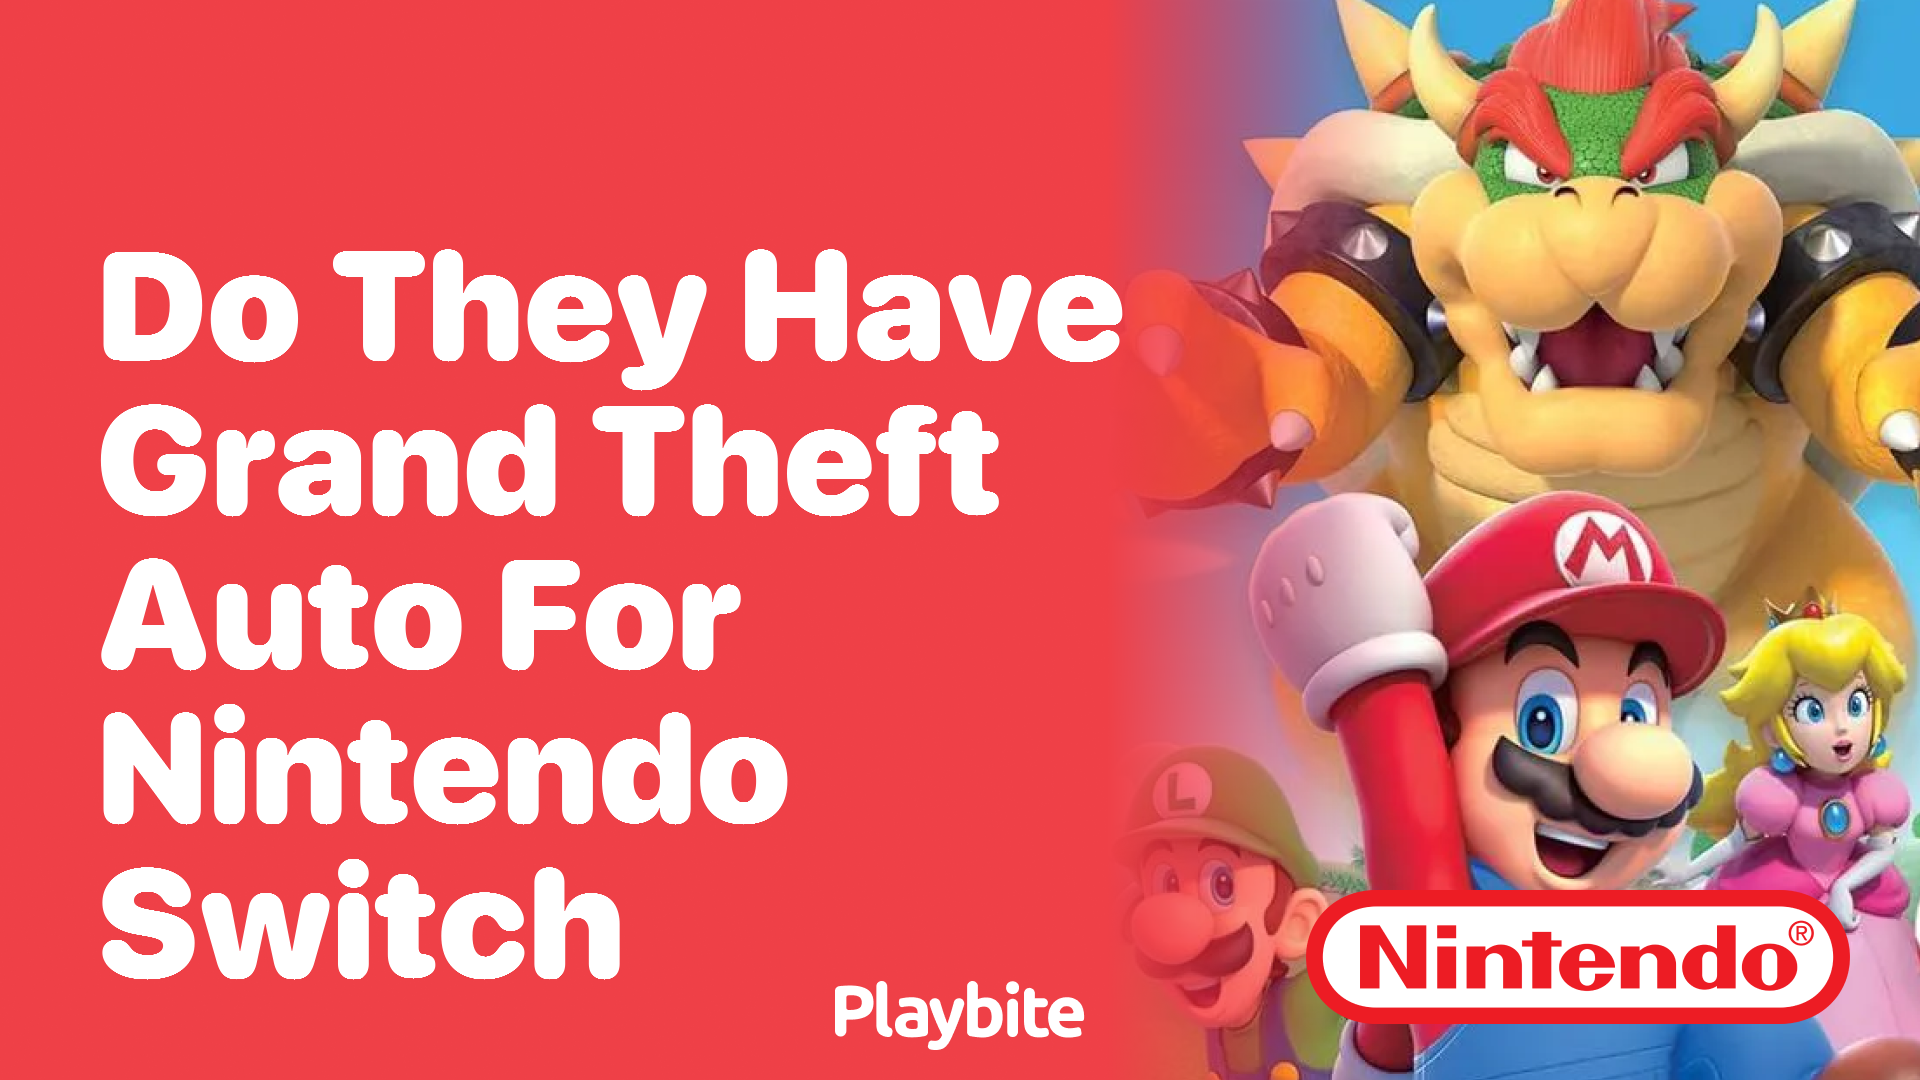 Do They Have Grand Theft Auto for Nintendo Switch?